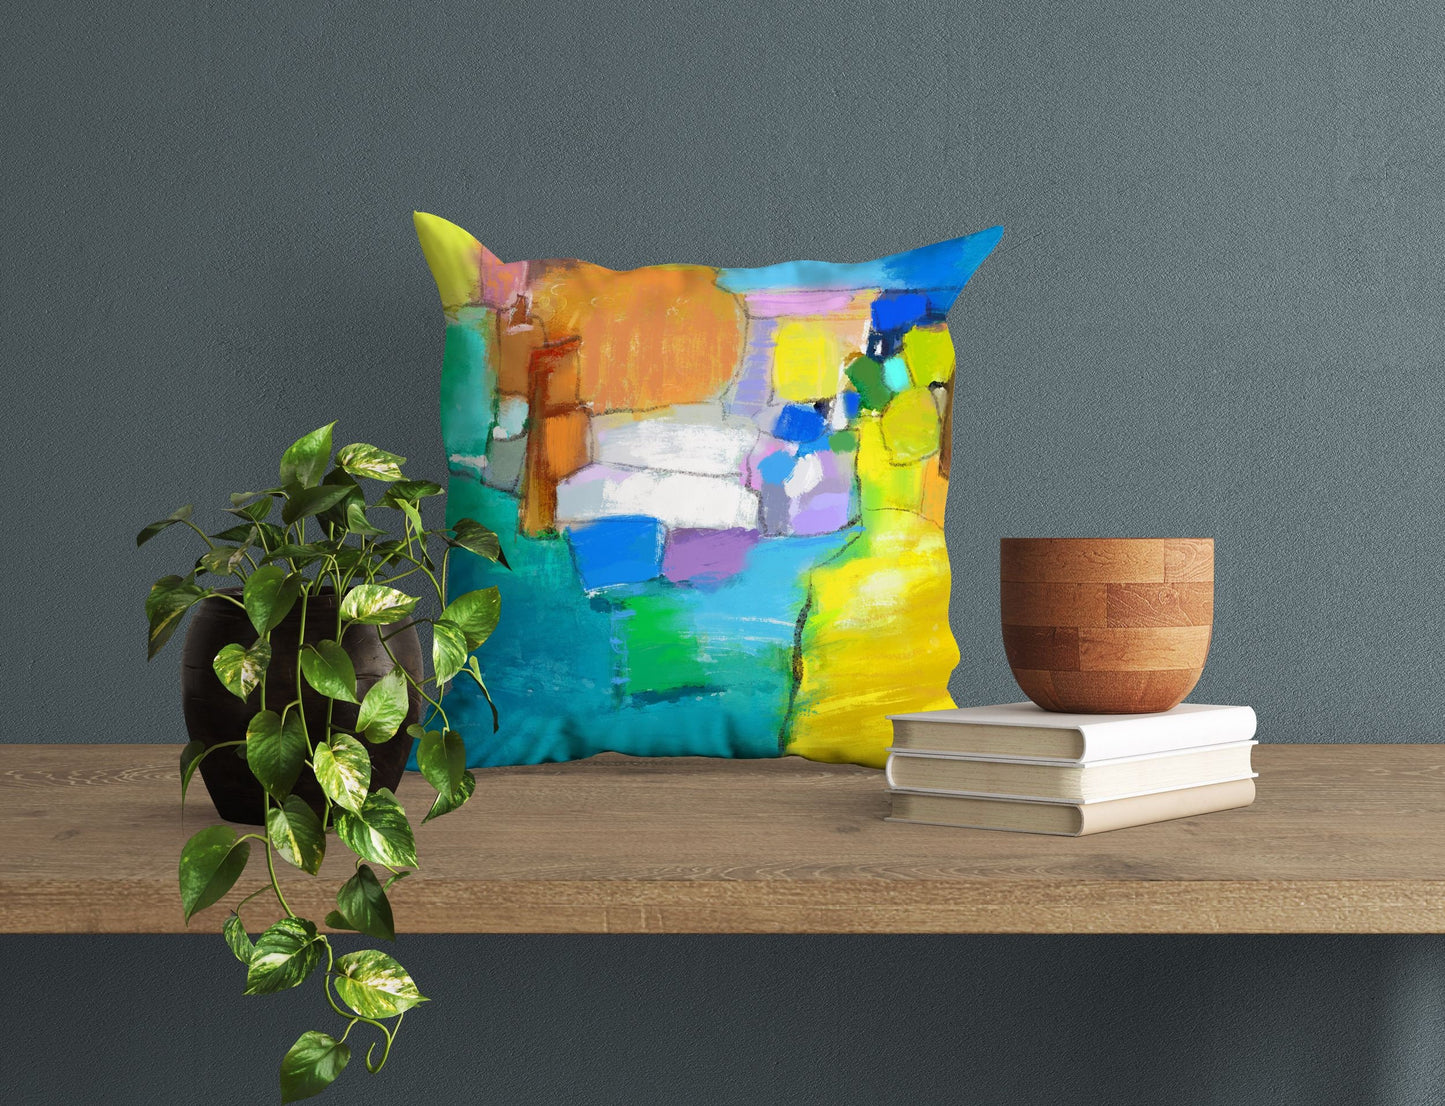 Abstract Pillow Case, Soft Pillow Cases, Colorful Pillow Case, Modern Pillow, 24X24 Pillow Case, Home Decor Pillow, Indoor Pillow Cases